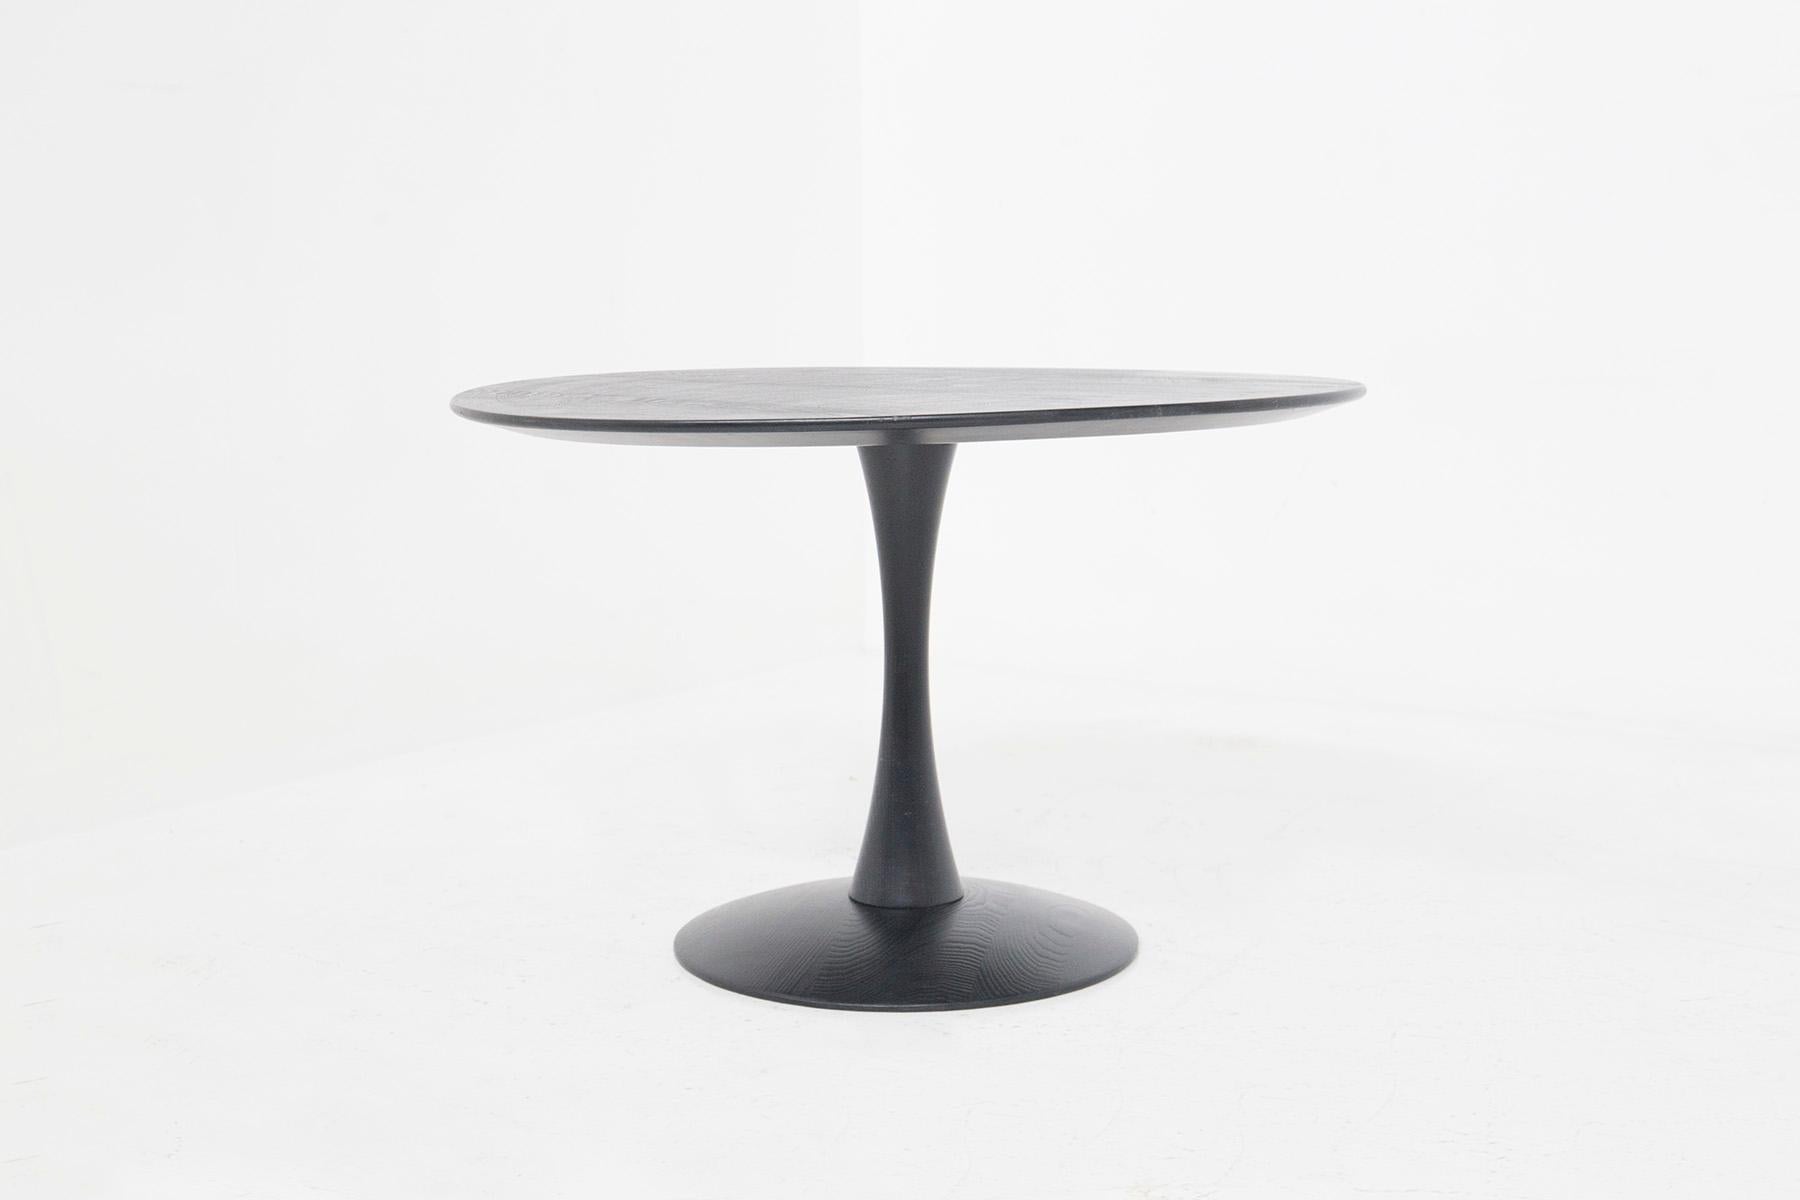 Beautiful vintage Danish coffee table designed in the 1960s by Nanna Ditzel.
Its structure is composed of purely circular elements, clean and essential elements that characterize the typical style of the Danish designer. 
The table is made